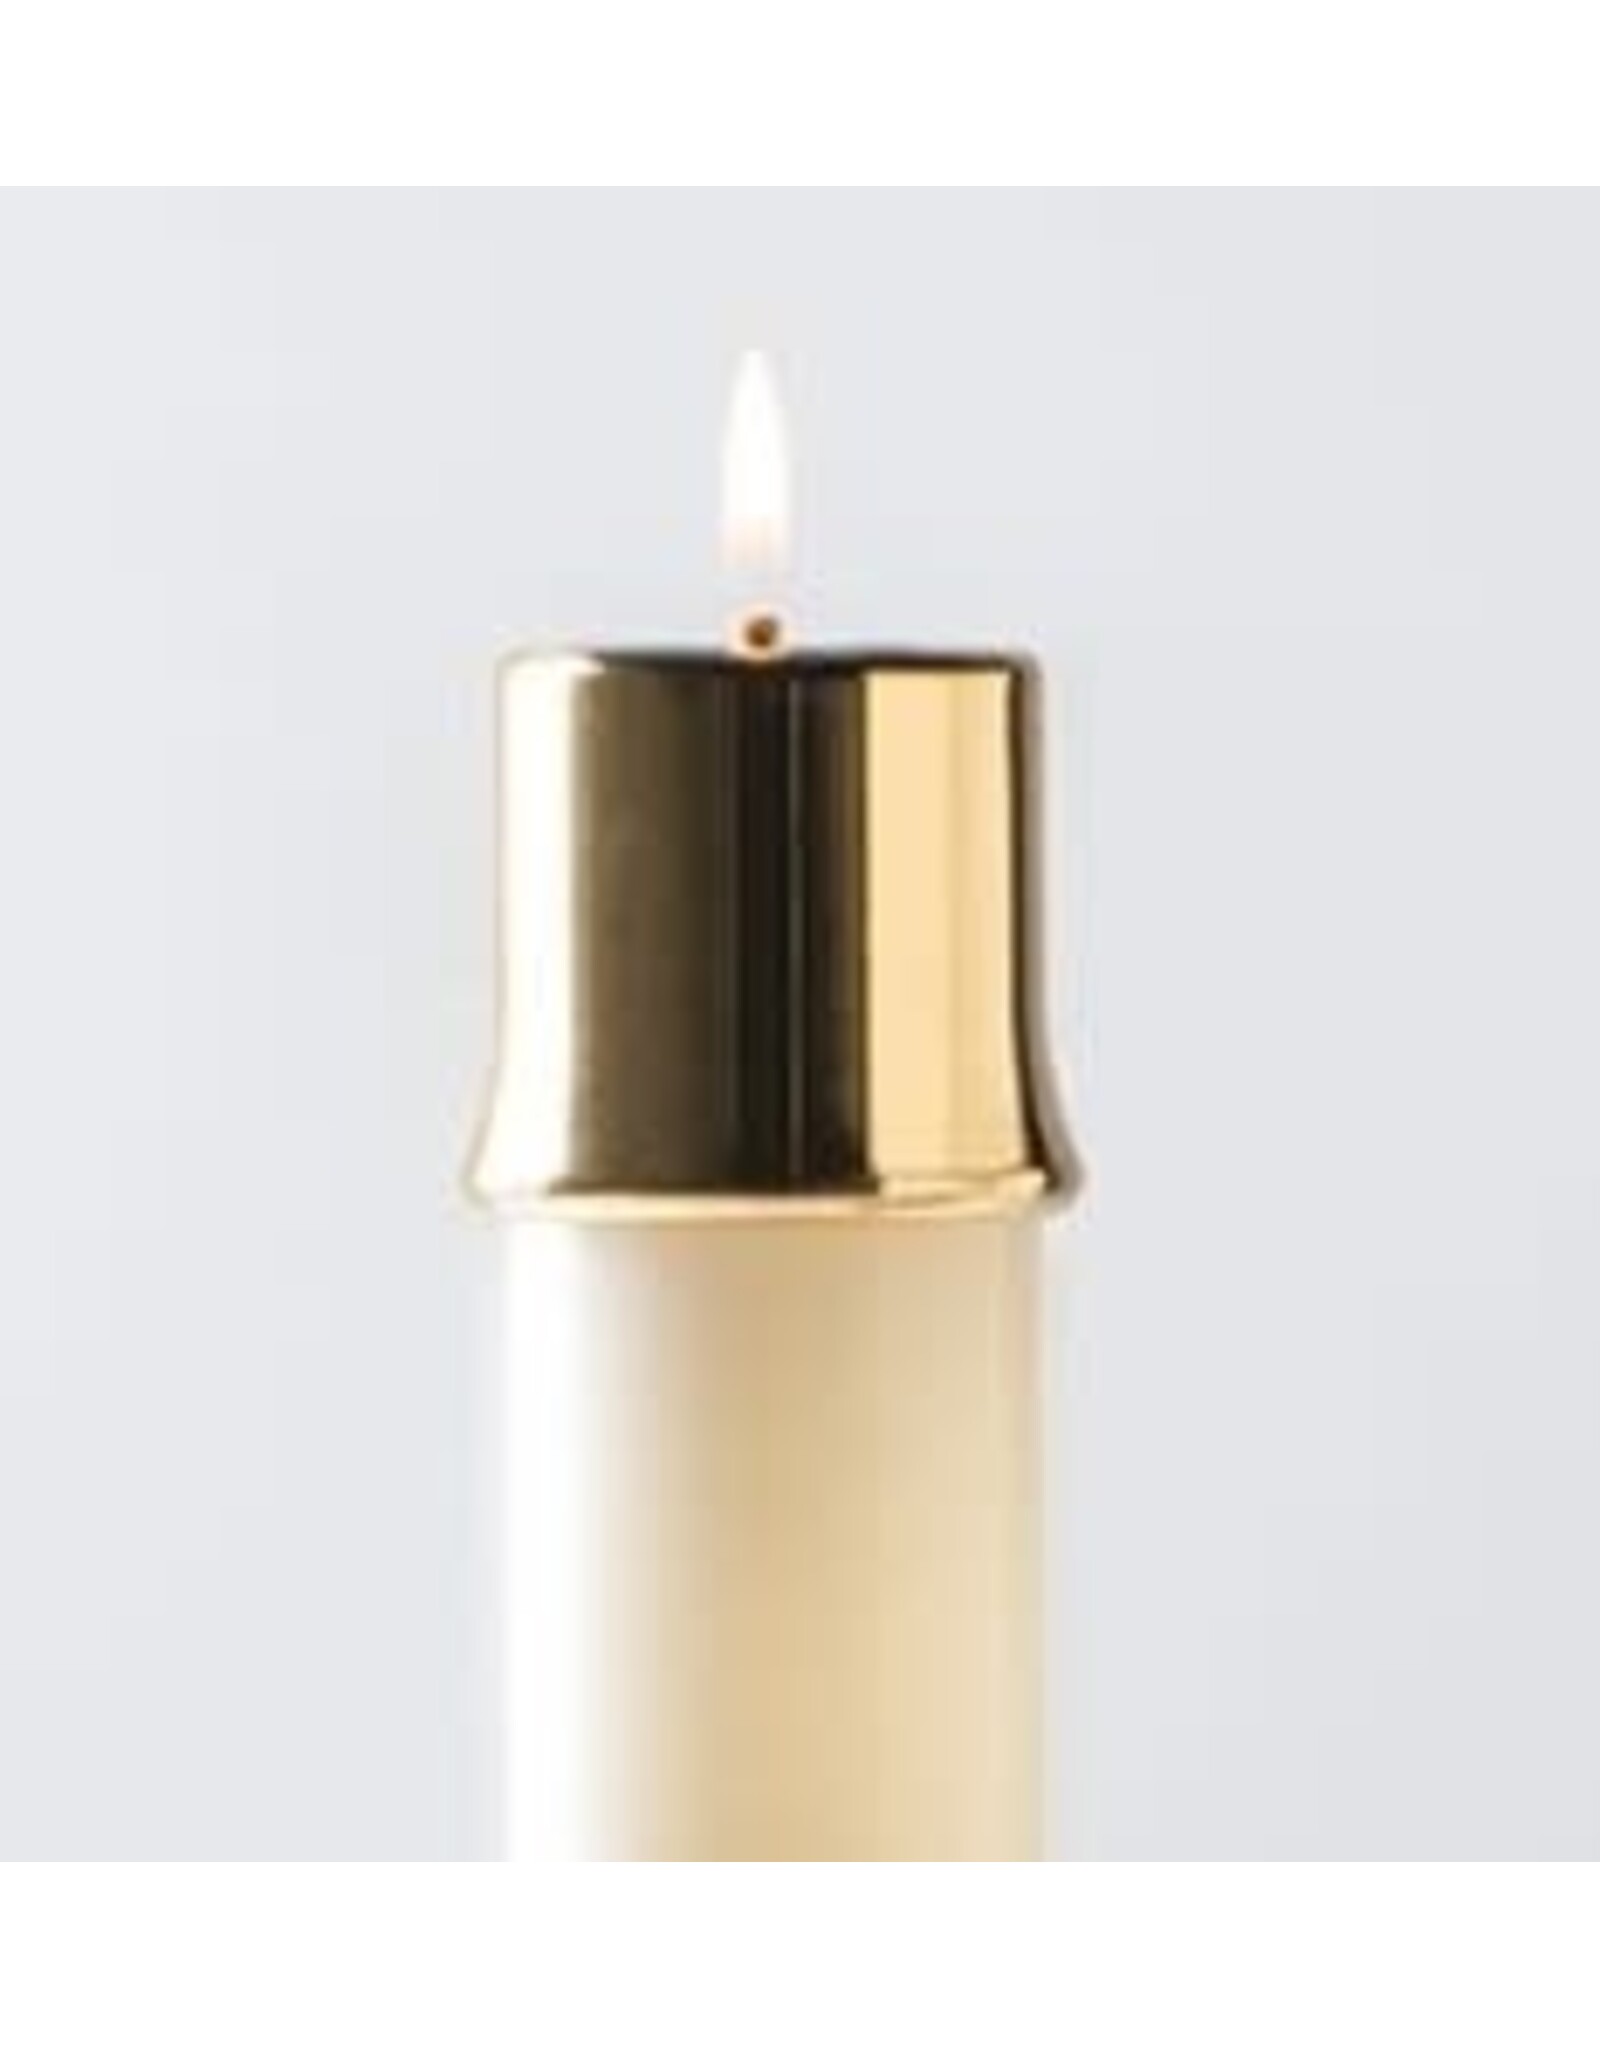 Lux Mundi Candle Follower for 1-7/8" Oil Shell